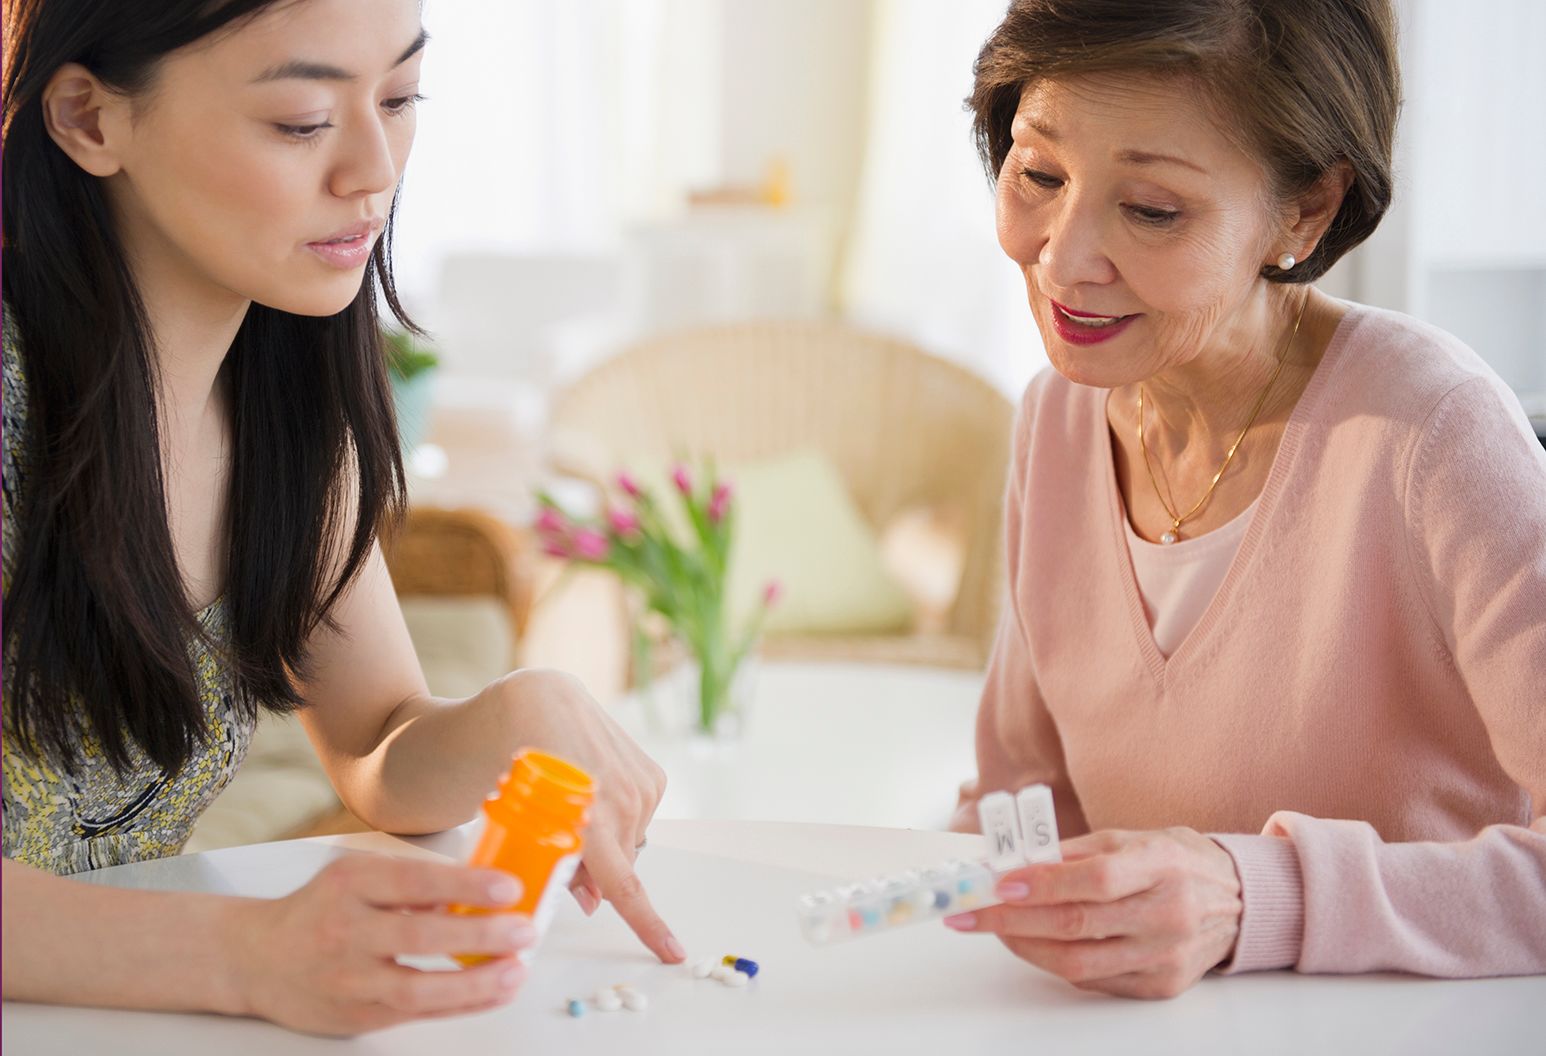 Daughter reviews prescription medications with her aging mother